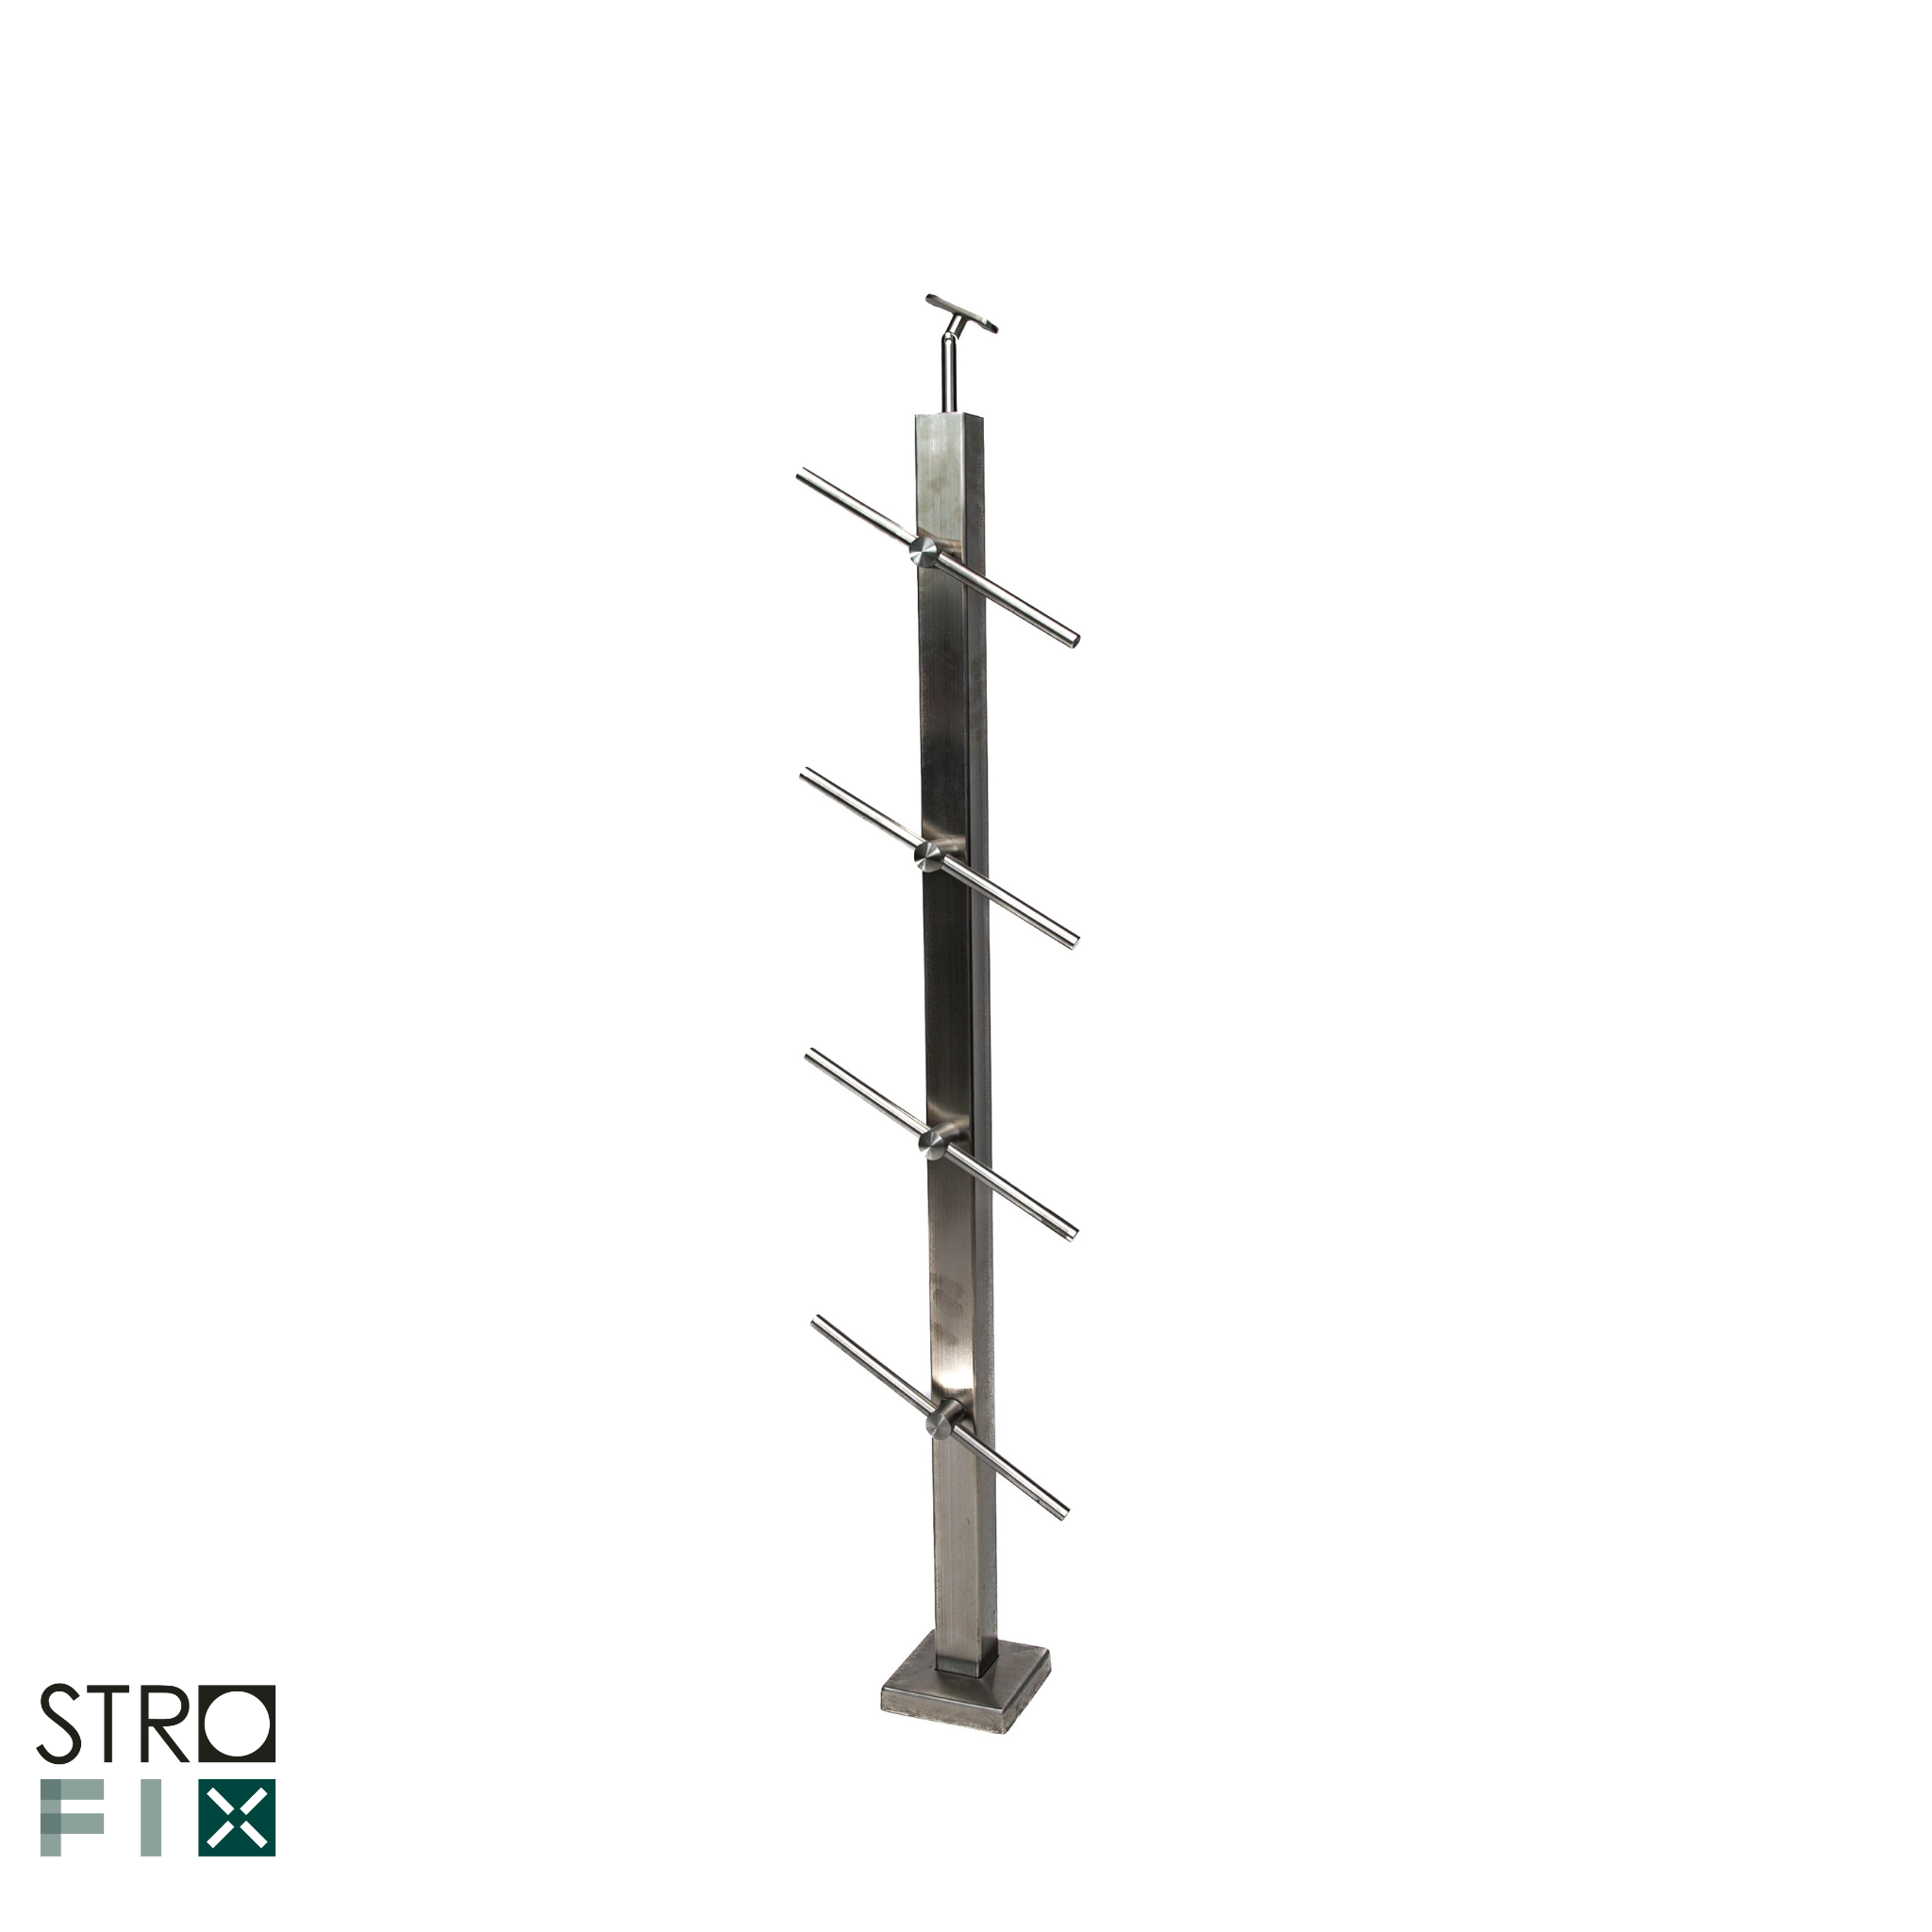 Rod railing system For stairs - 42.4 - StroFIX